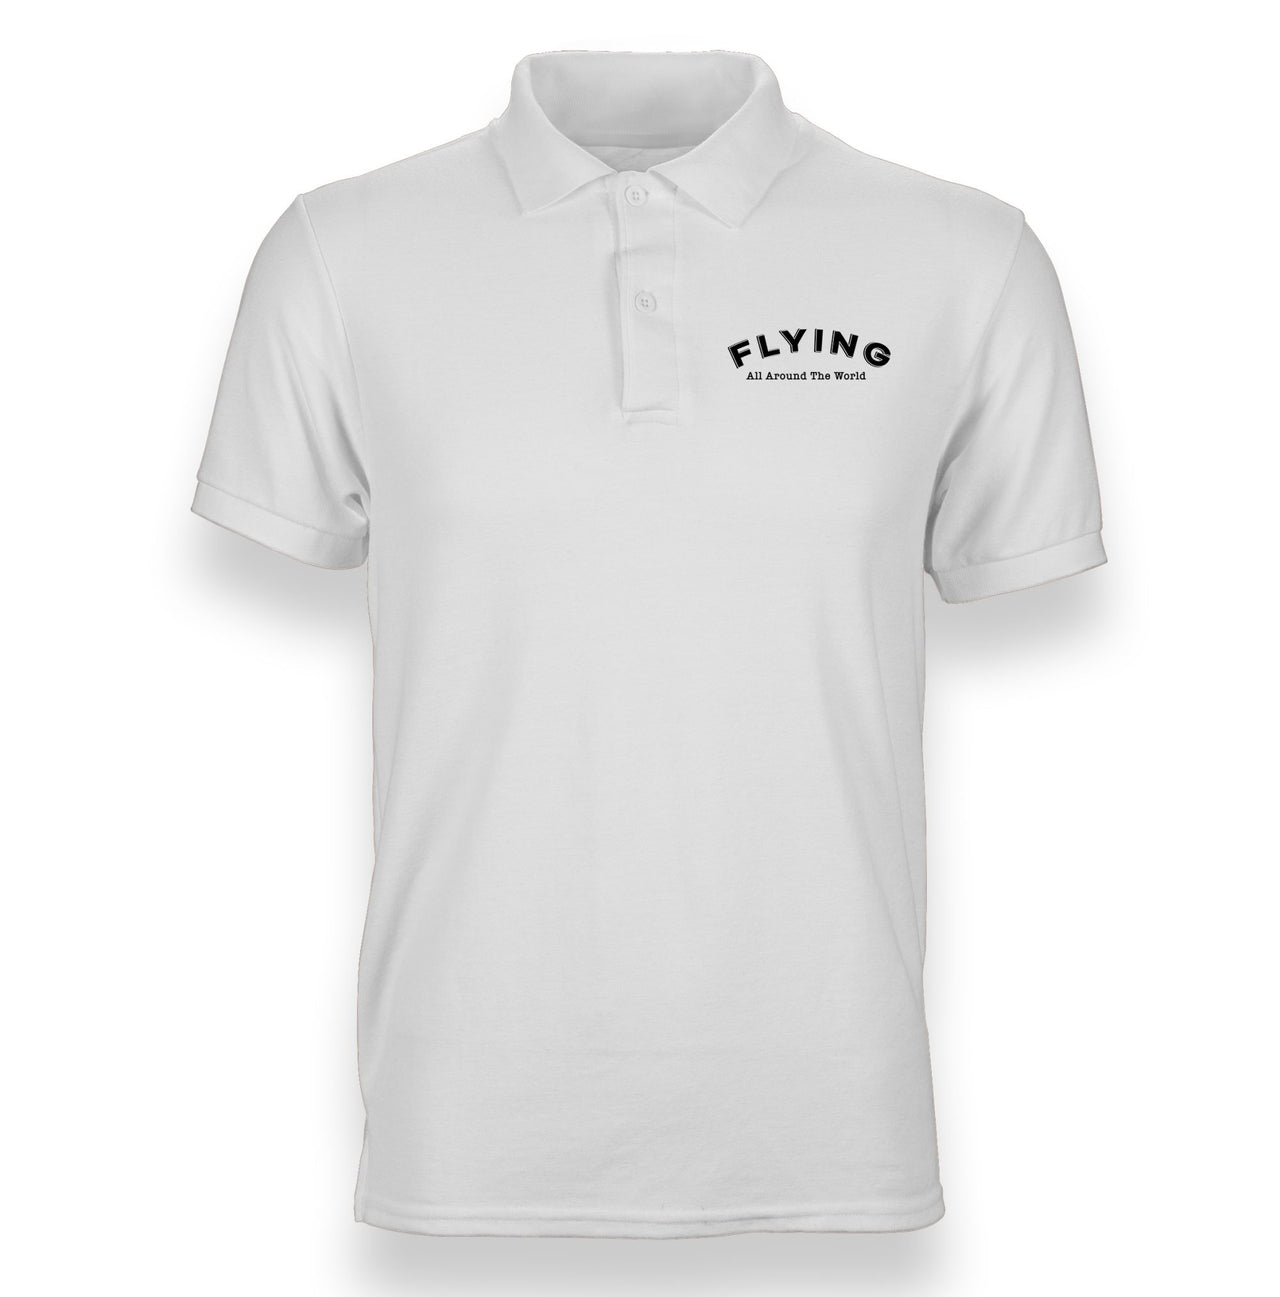 Flying All Around The World Designed "WOMEN" Polo T-Shirts